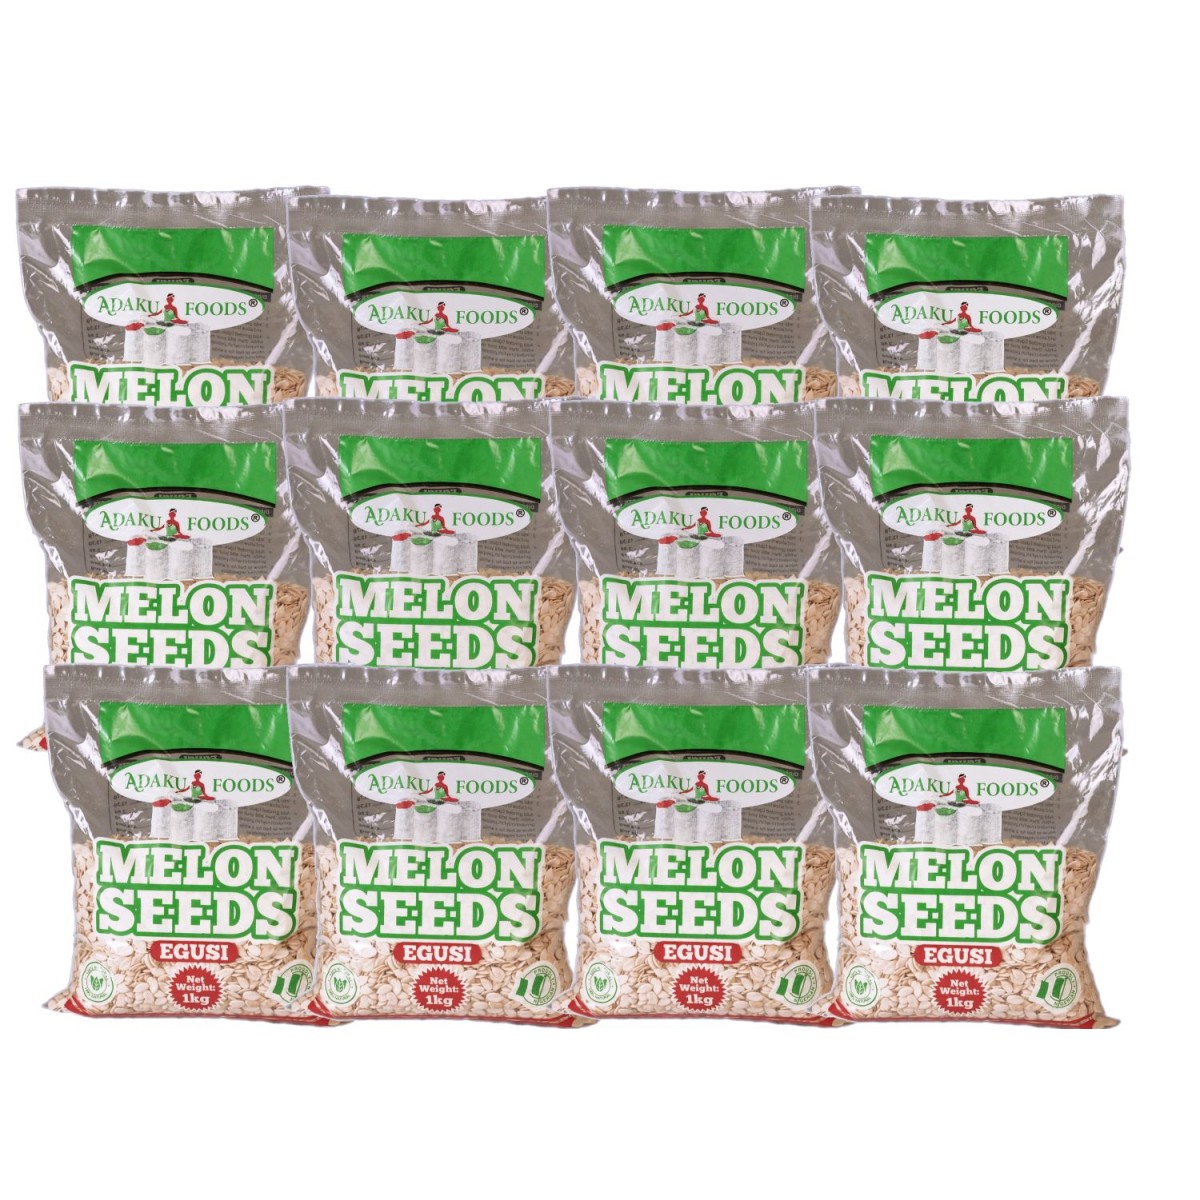 Pack of whole melon seeds 12kg